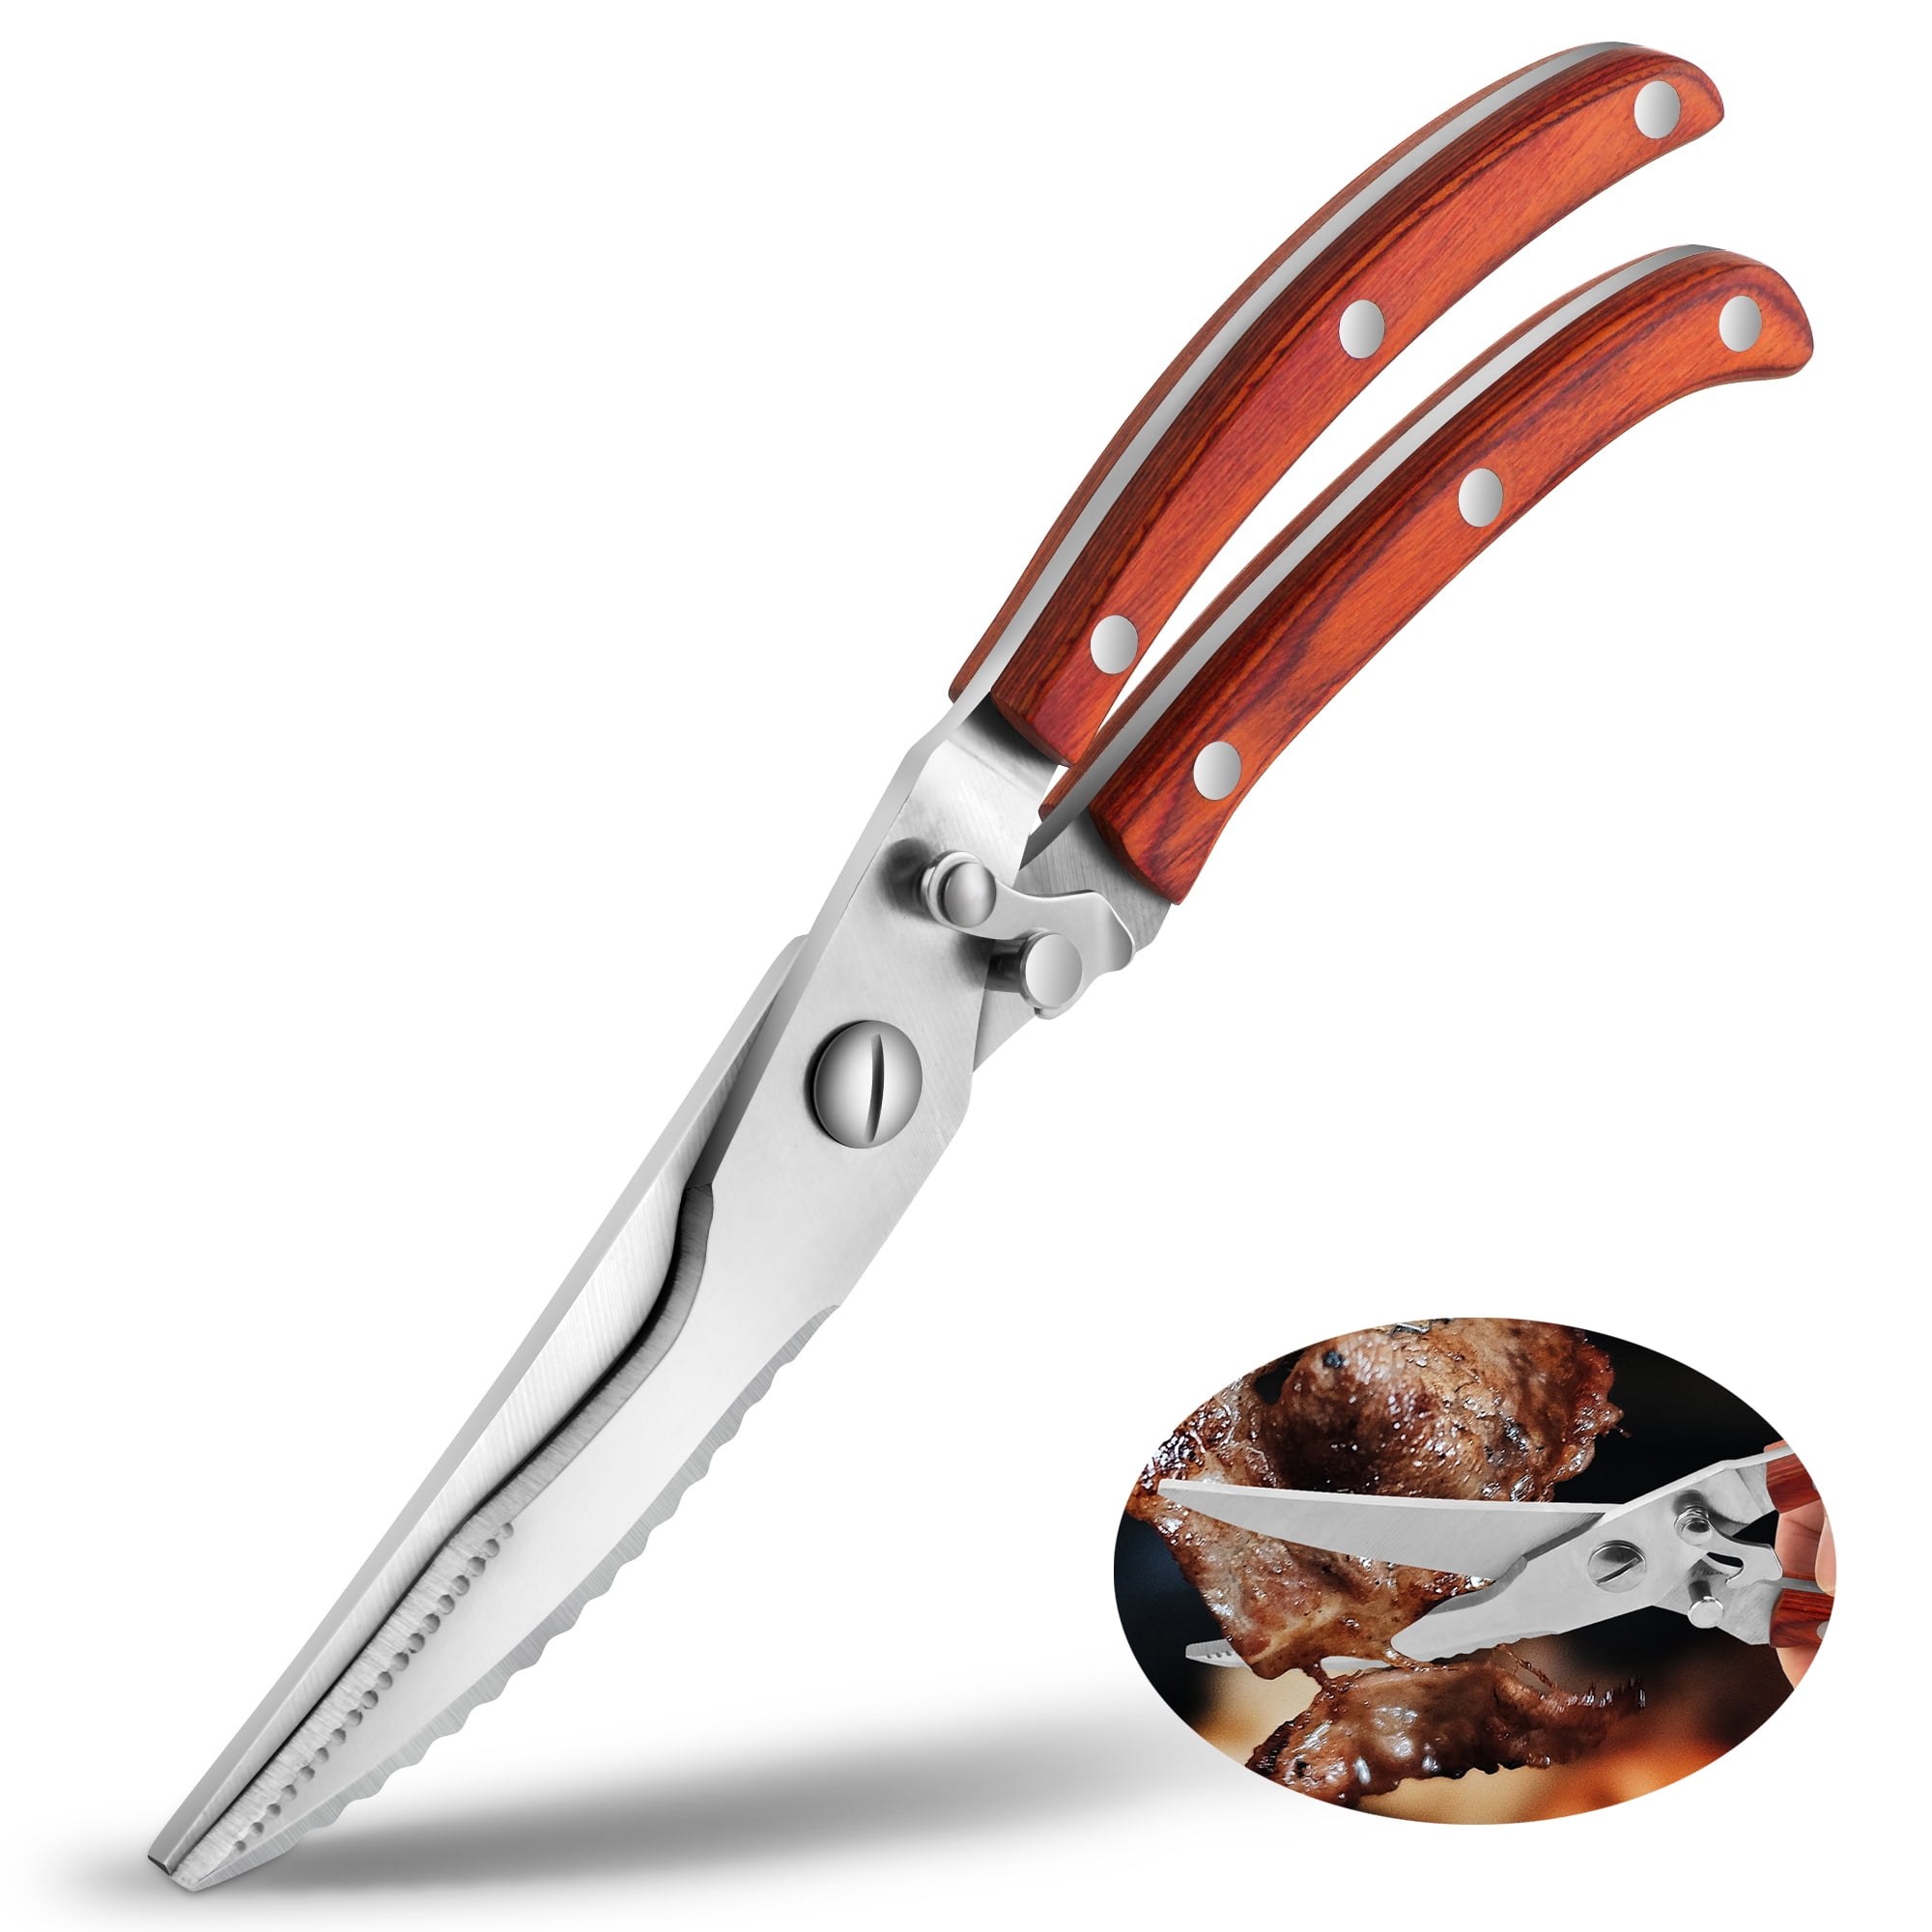 LOKIMSI Kitchen Stainless Shears,Heavy Duty Poultry Scissors for Kitchen, Outdoor, Camping,Stainless Steel, Size: 8, Silver